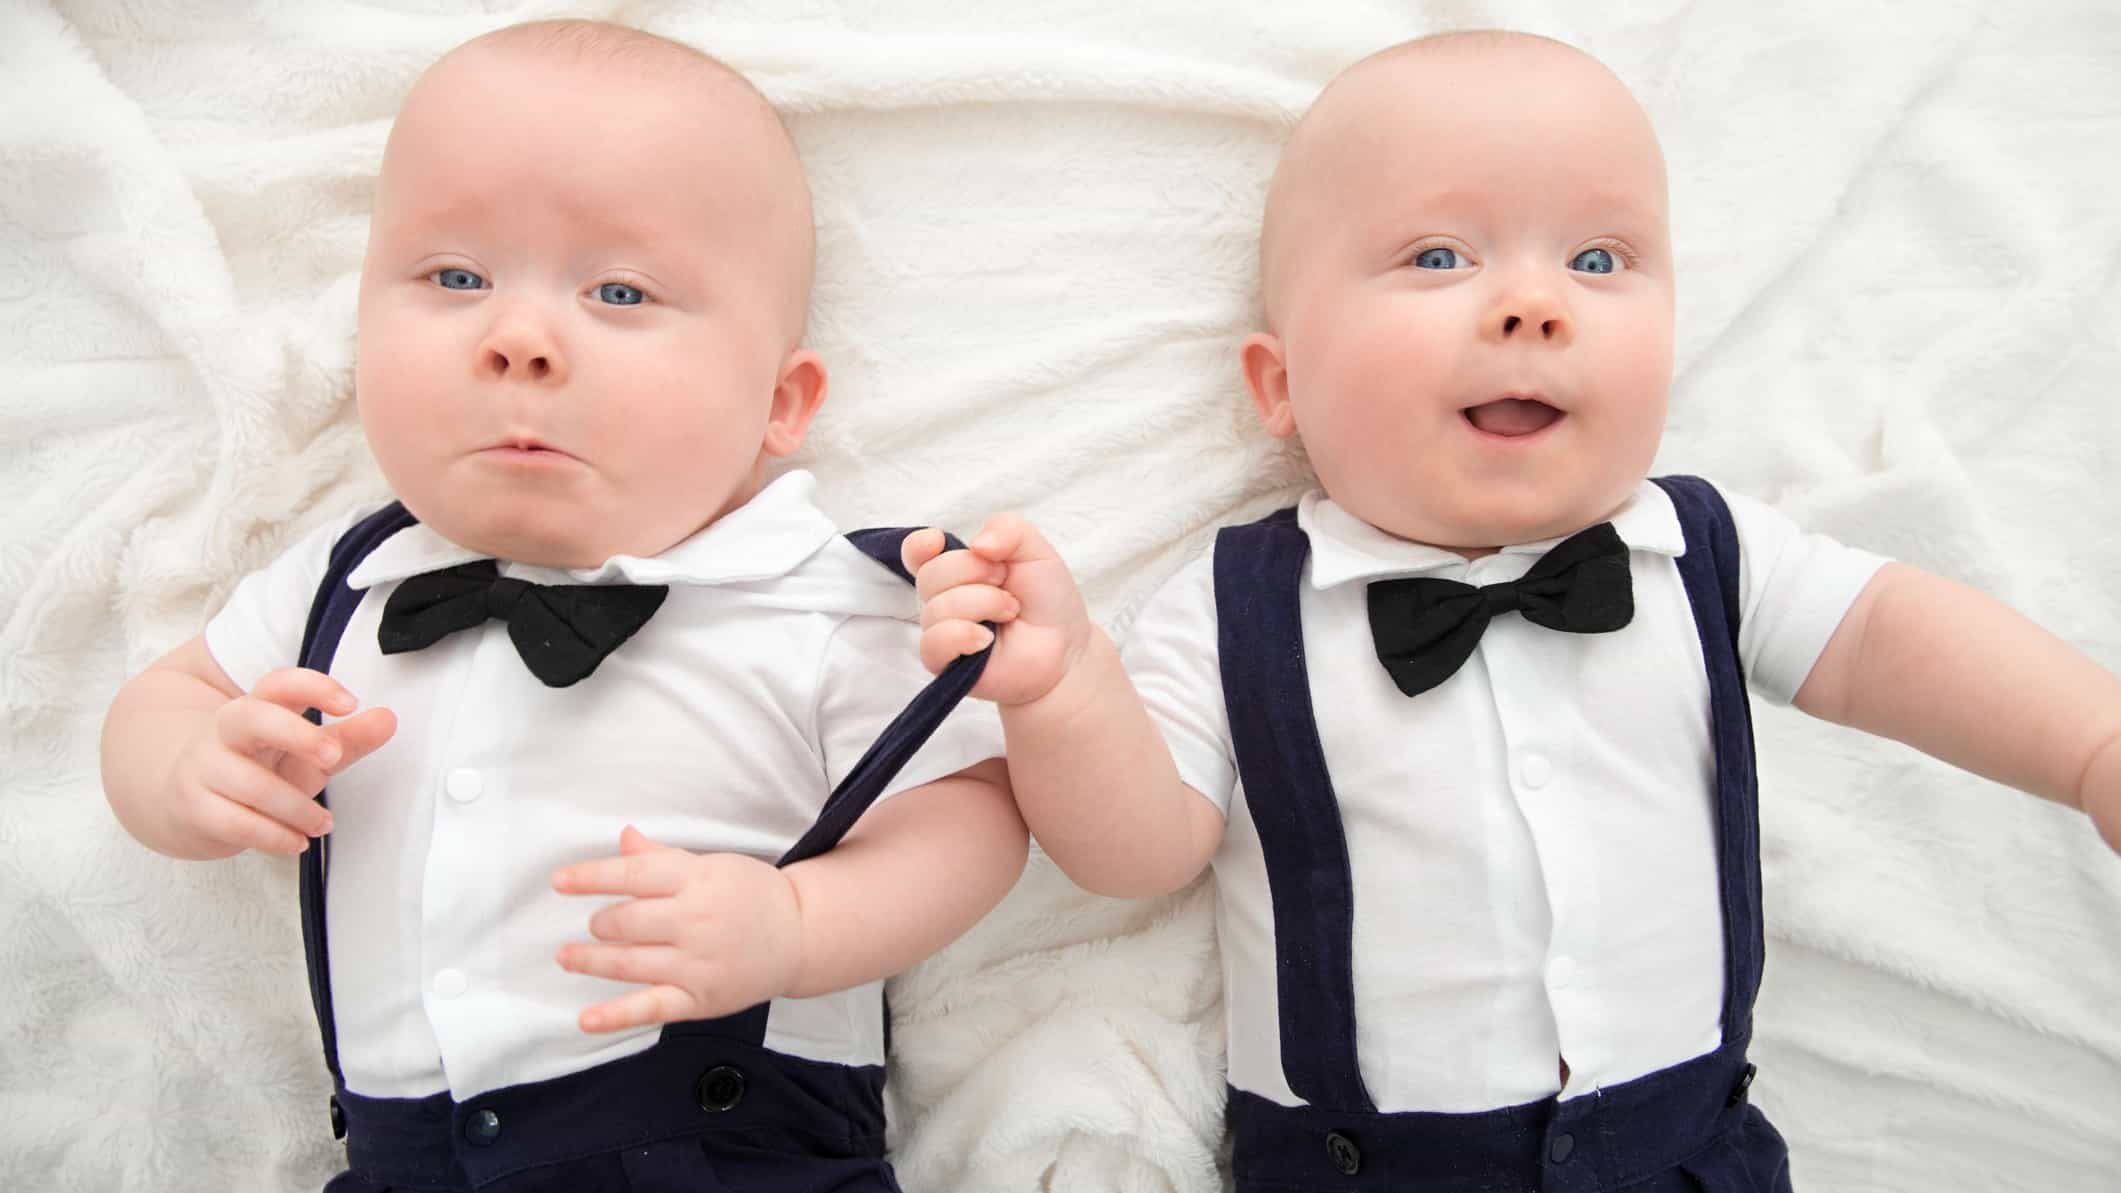 Two twin babies dressed in bow ties, white shirts and braces lie side by side with one grabbing the over shoulder brace of his brother and smiling cheekily at the camera.